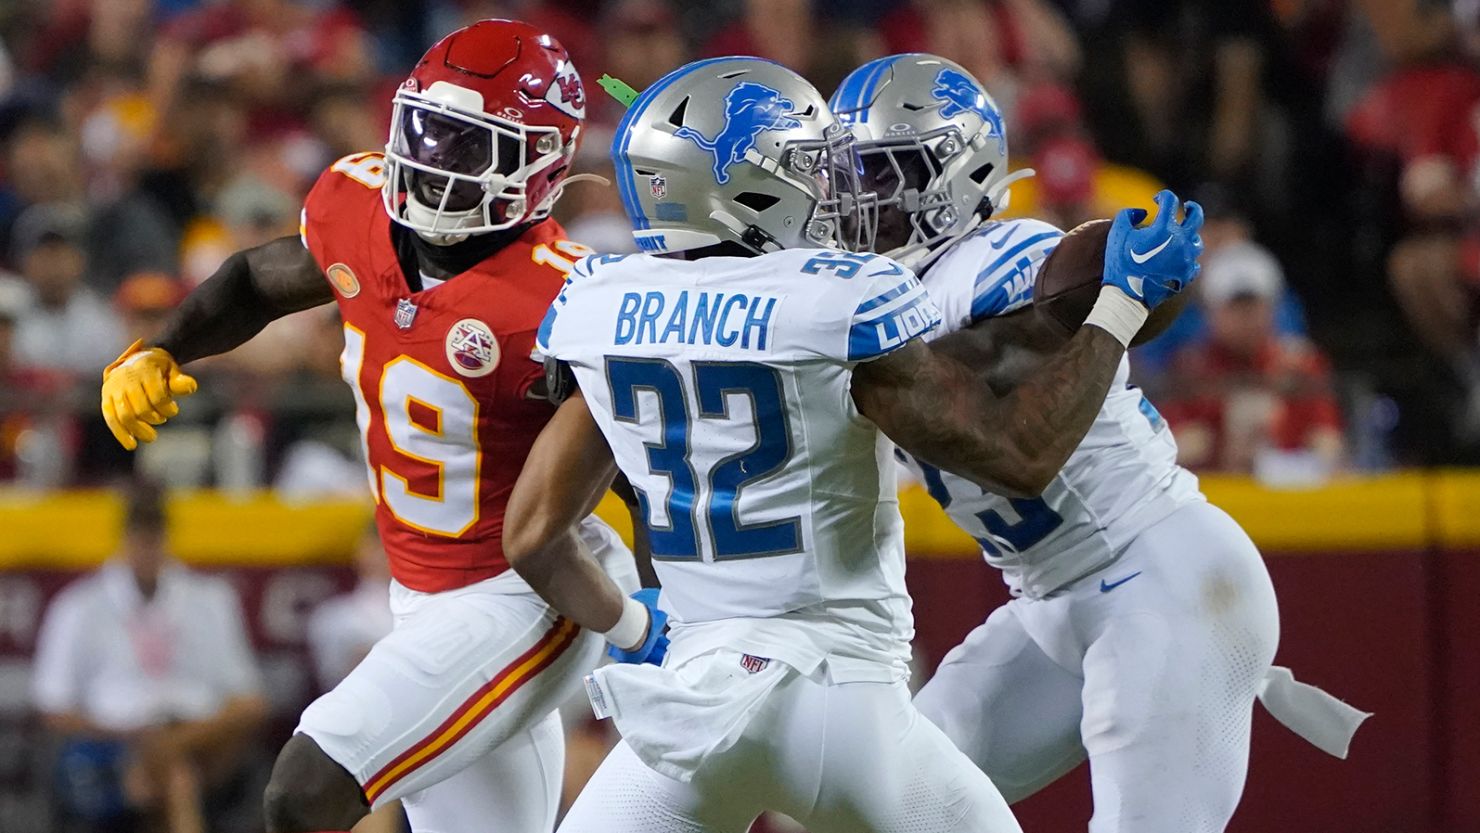 Detroit Lions safety Brian Branch (32) intercepts a pass intended for Kansas City Chiefs wide receiver Kadarius Toney (19) before running it back for a touchdown during the game's second half in Kansas City on Thursday.